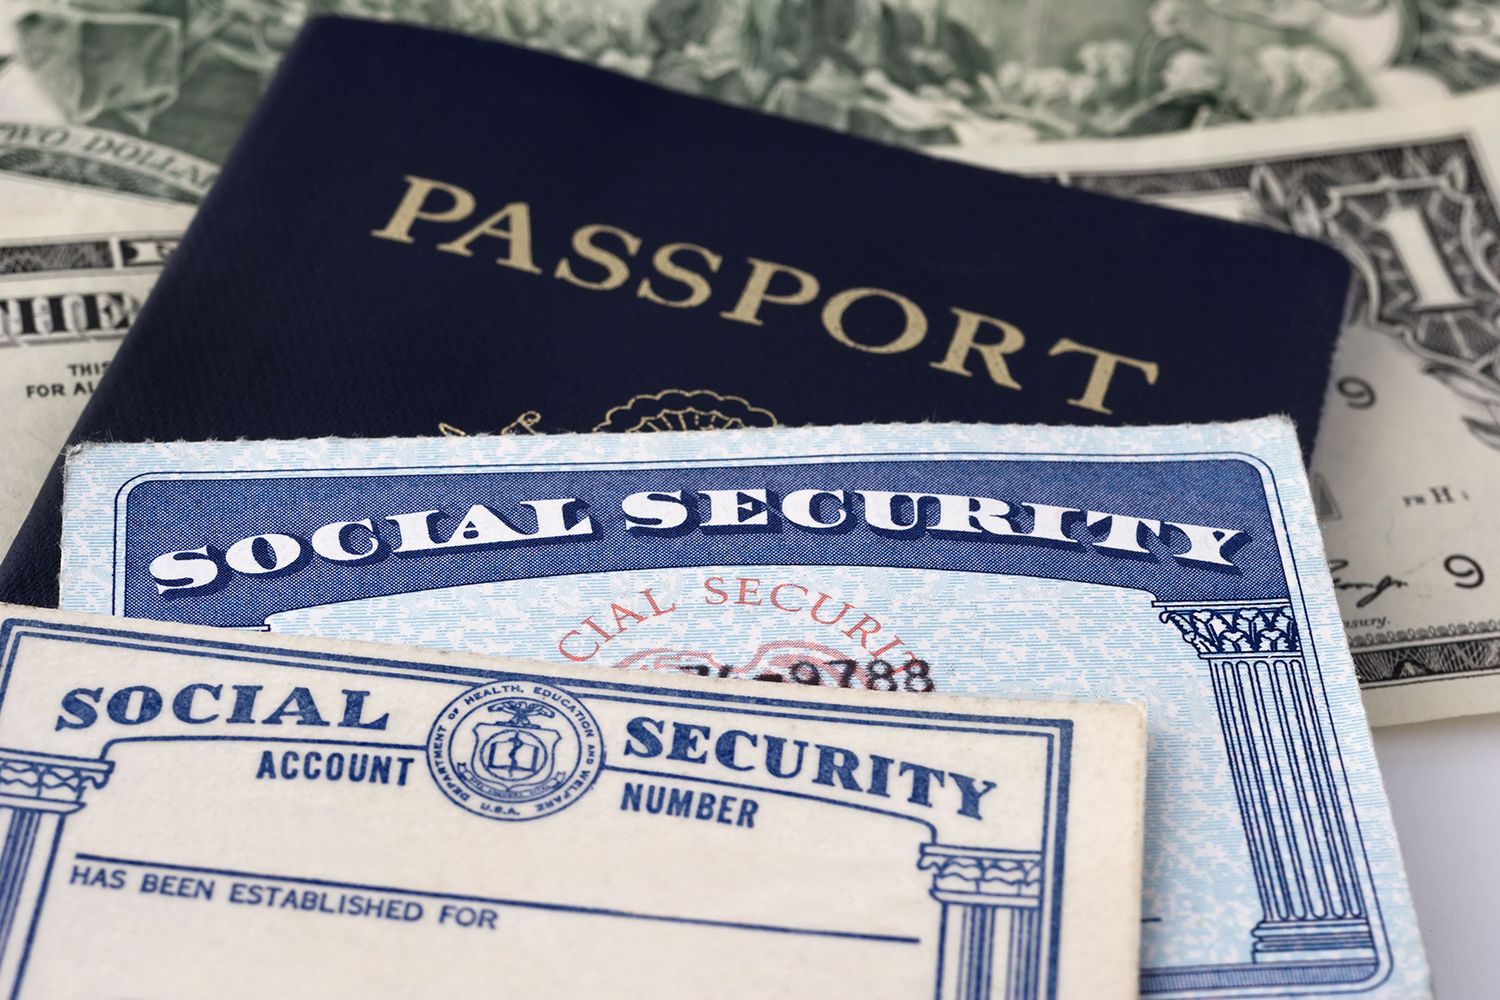 Social Security Cards are Your Best Option